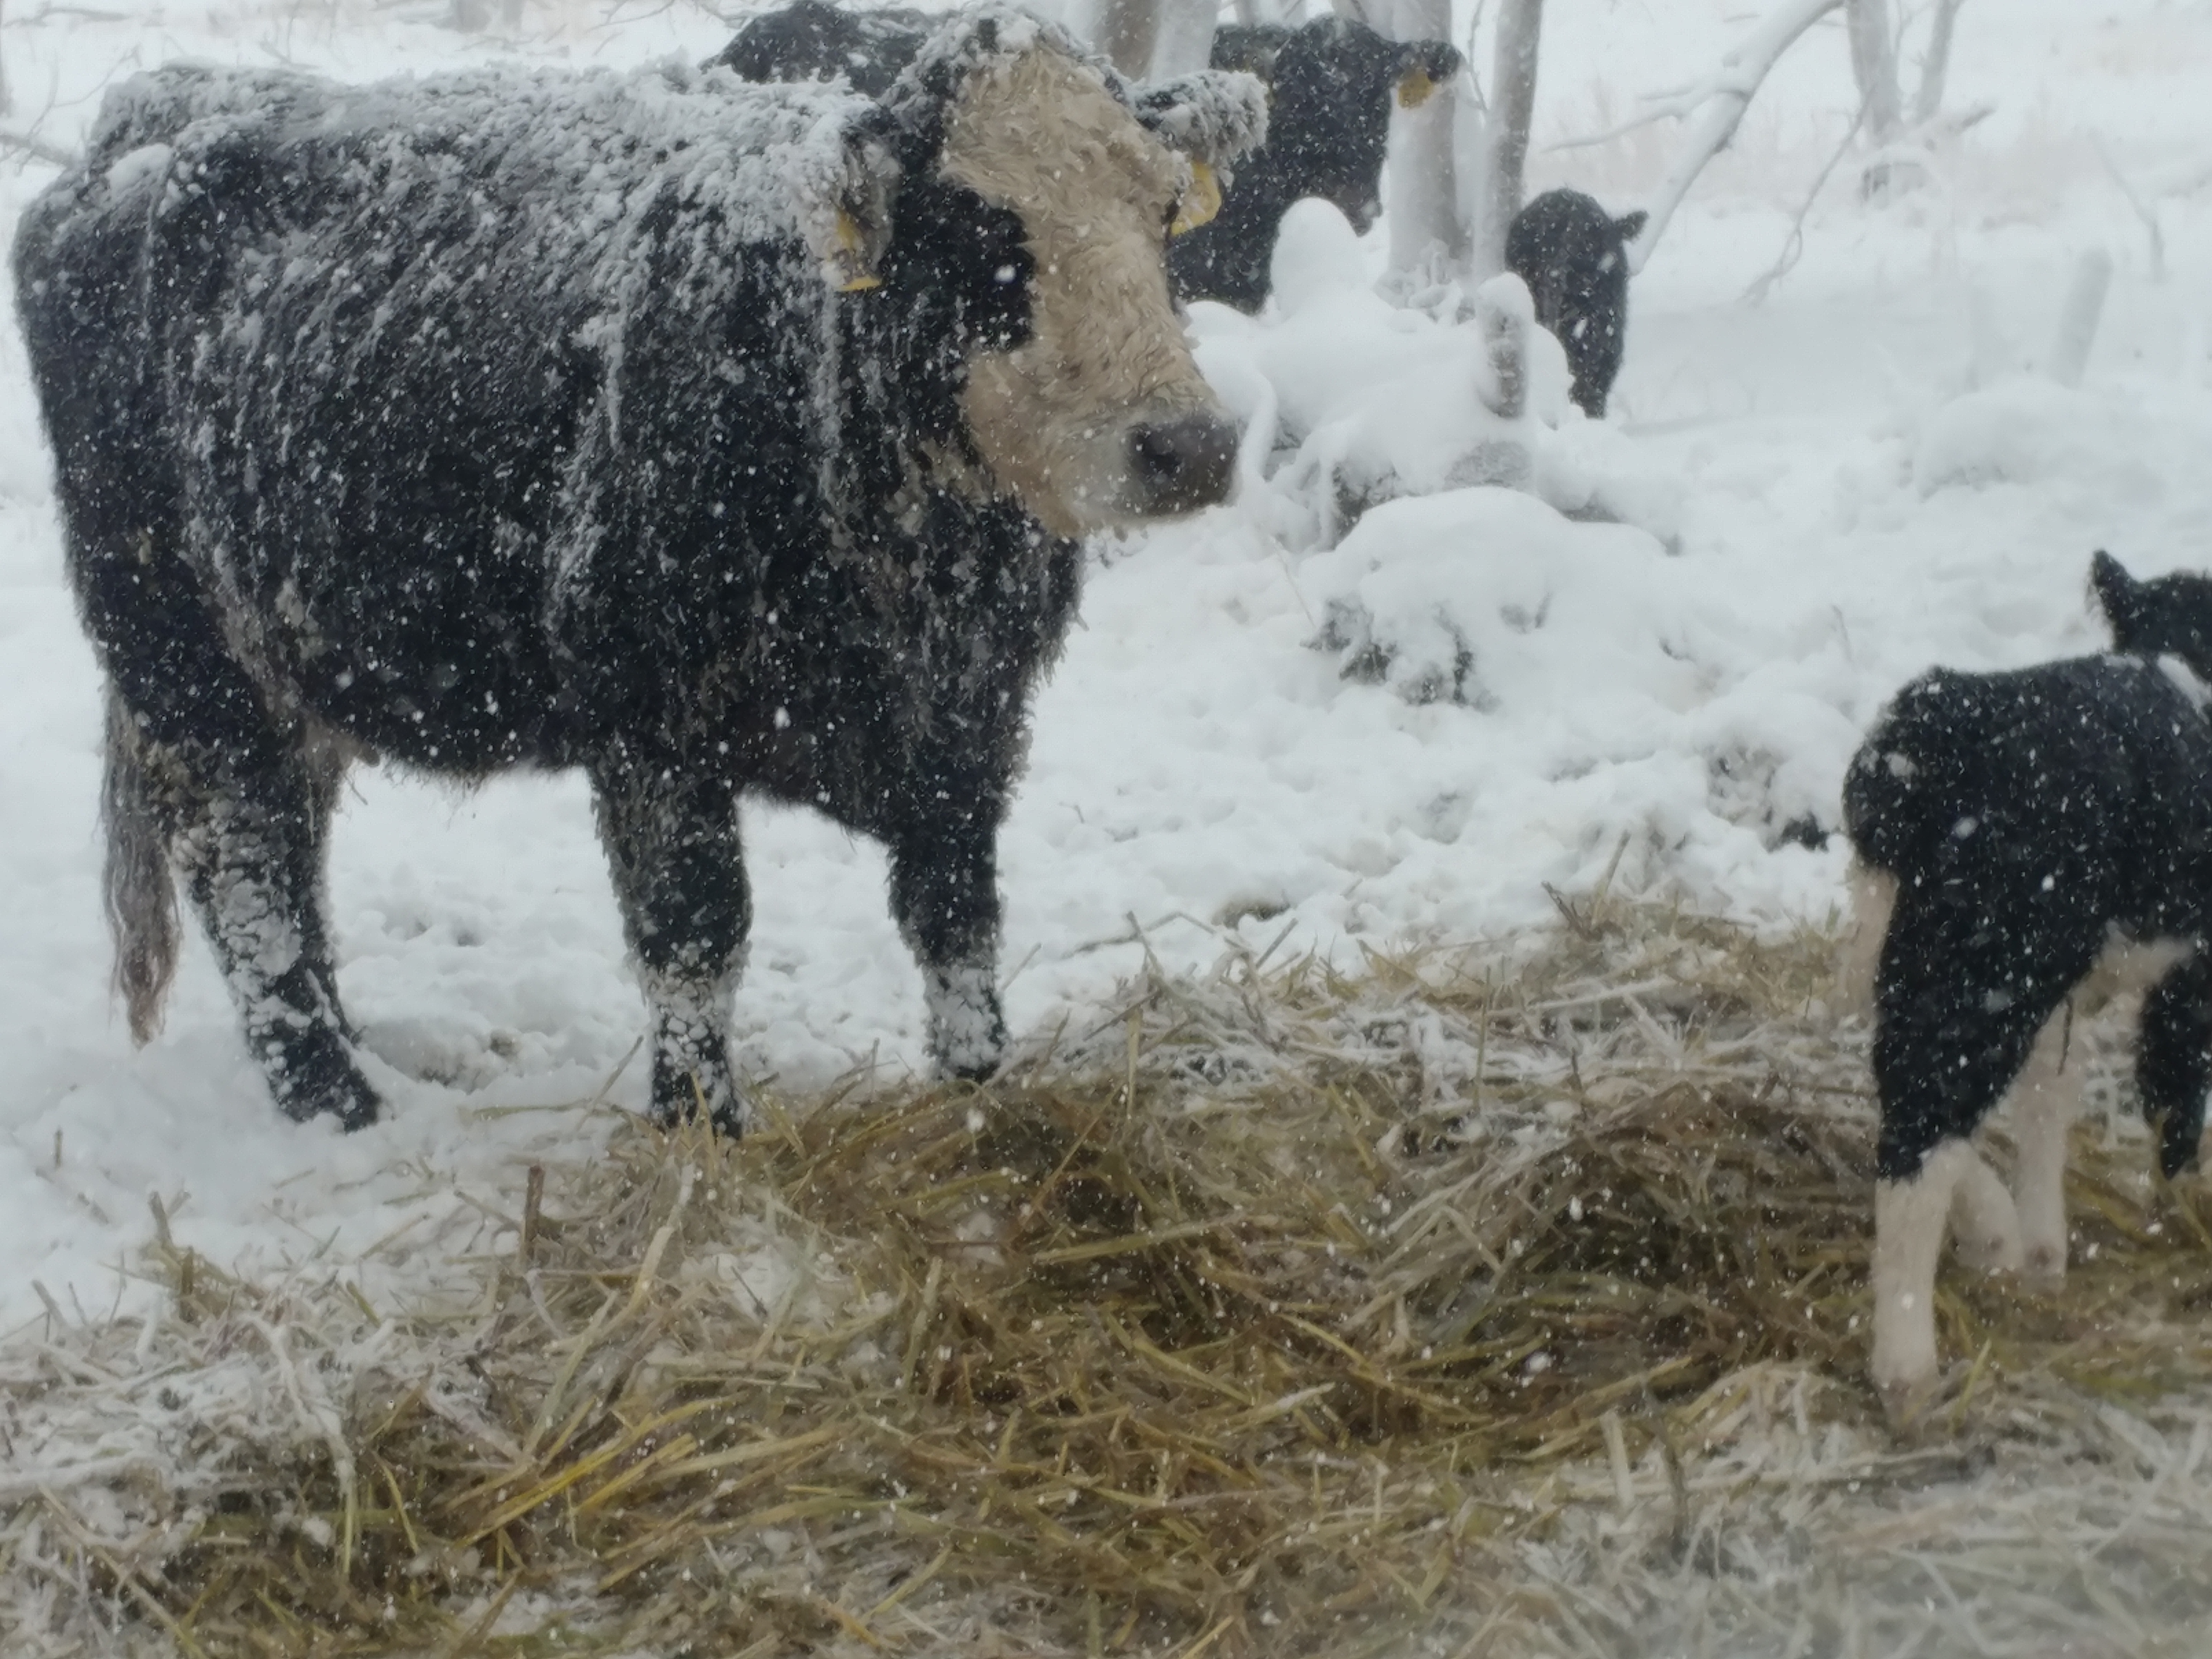 A blizzard swept high winds with heavy snow accumulations across northern Nebraska on March 13, creating hardships for many ranchers during calving. (M. Crawford / NCTA News)